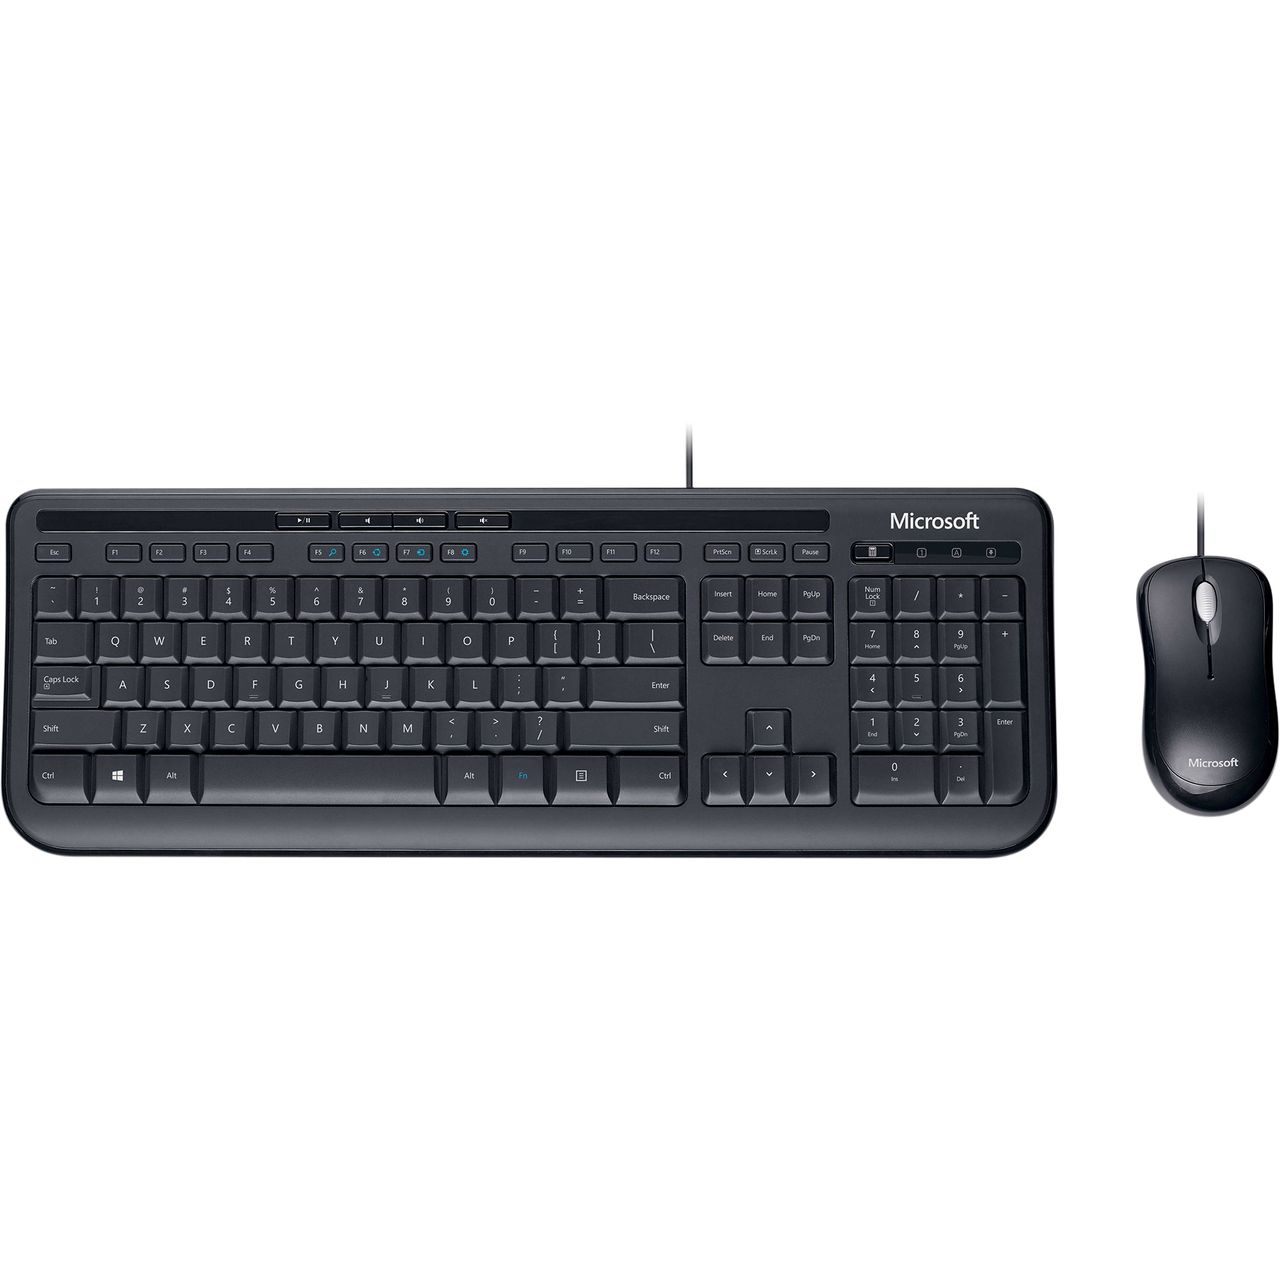 Microsoft Wired USB Keyboard with Optical Mouse Review